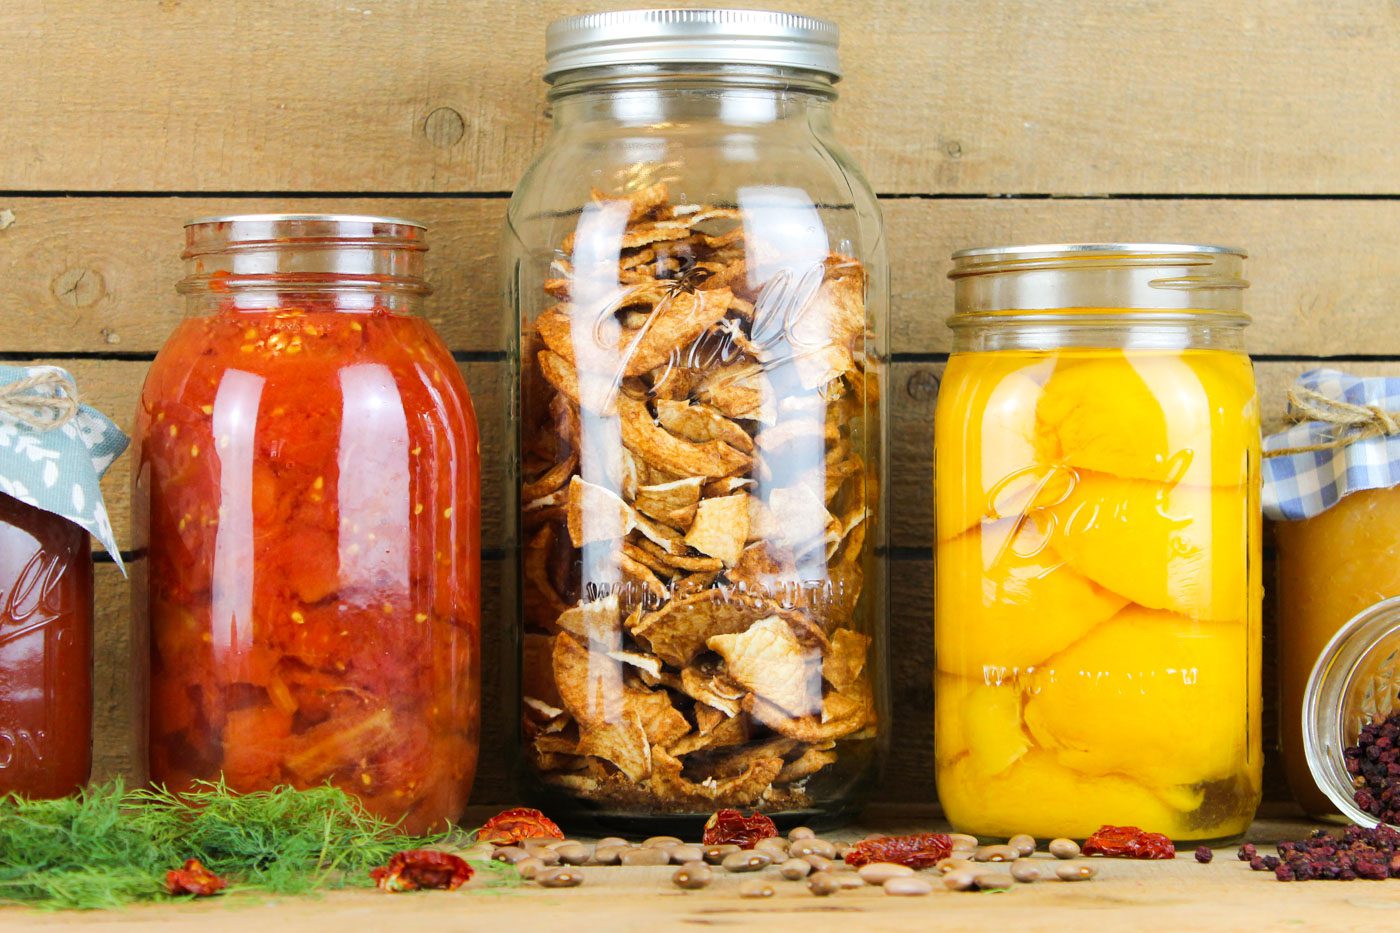 jars of home preserved food sitting on a wooden shelf